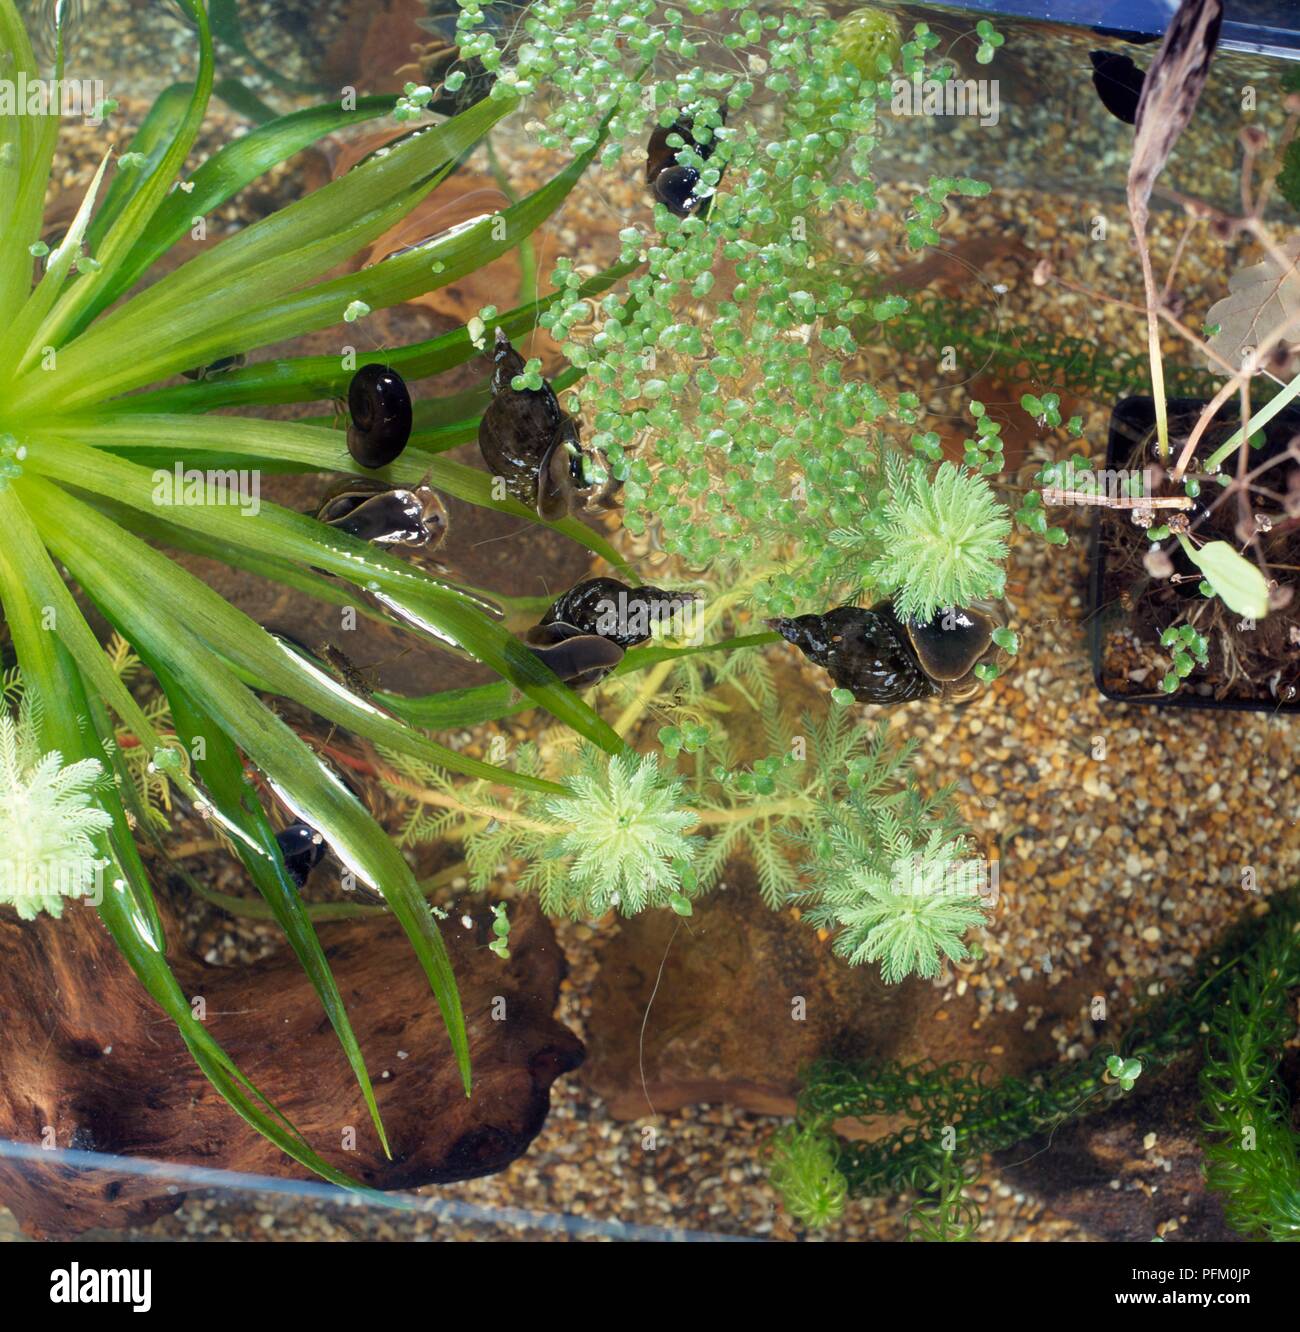 Overhead view of a tank containing duckweed plants and aquatic snails Stock Photo